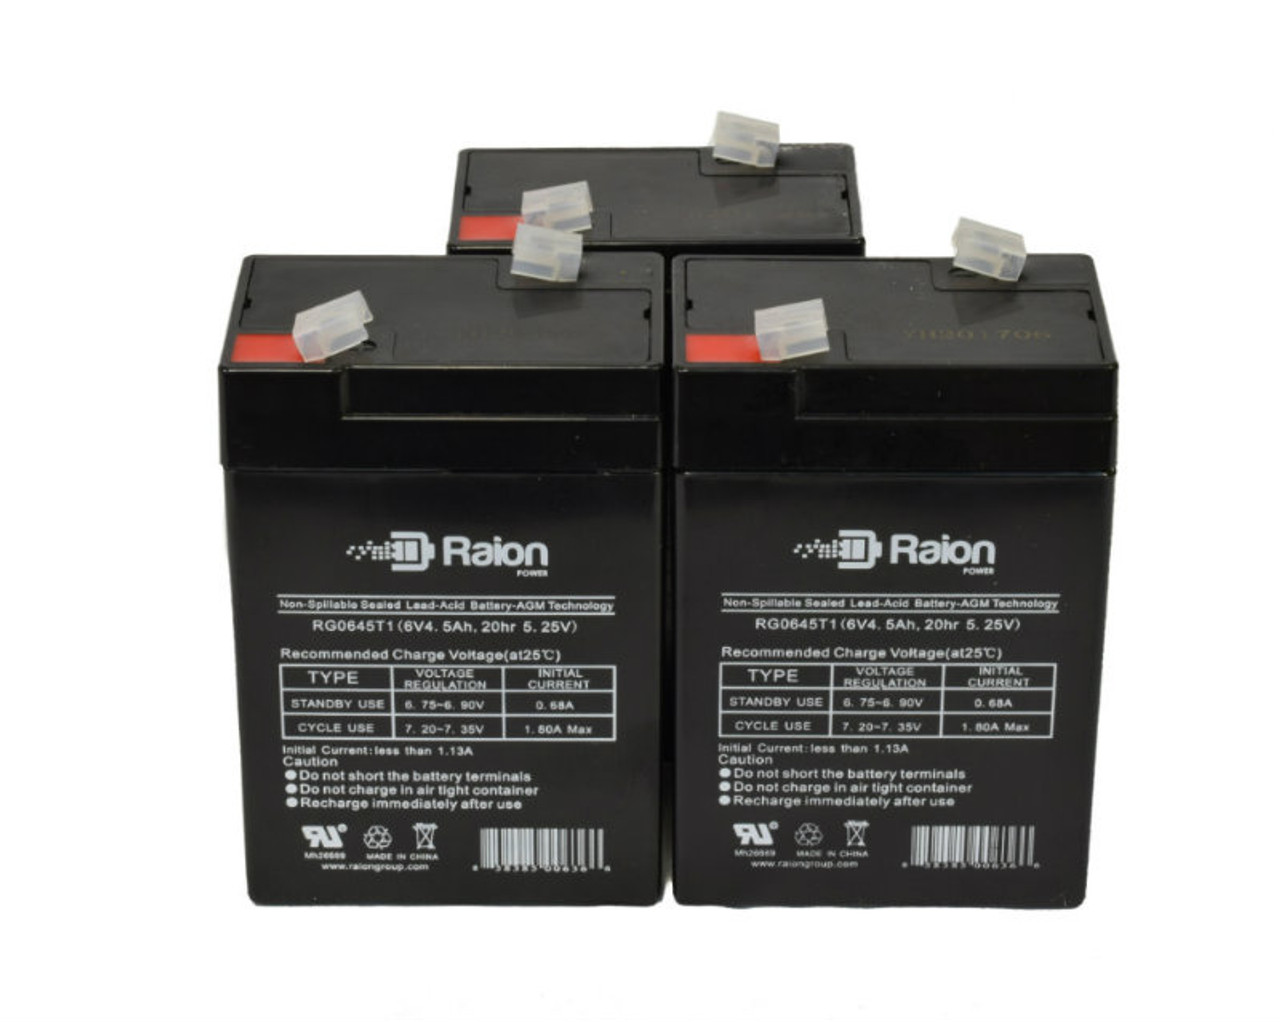 Raion Power RG0645T1 6V 4.5Ah Replacement Medical Equipment Battery for Orion Research Sodium Potassium Analyzer 1020 - 3 Pack